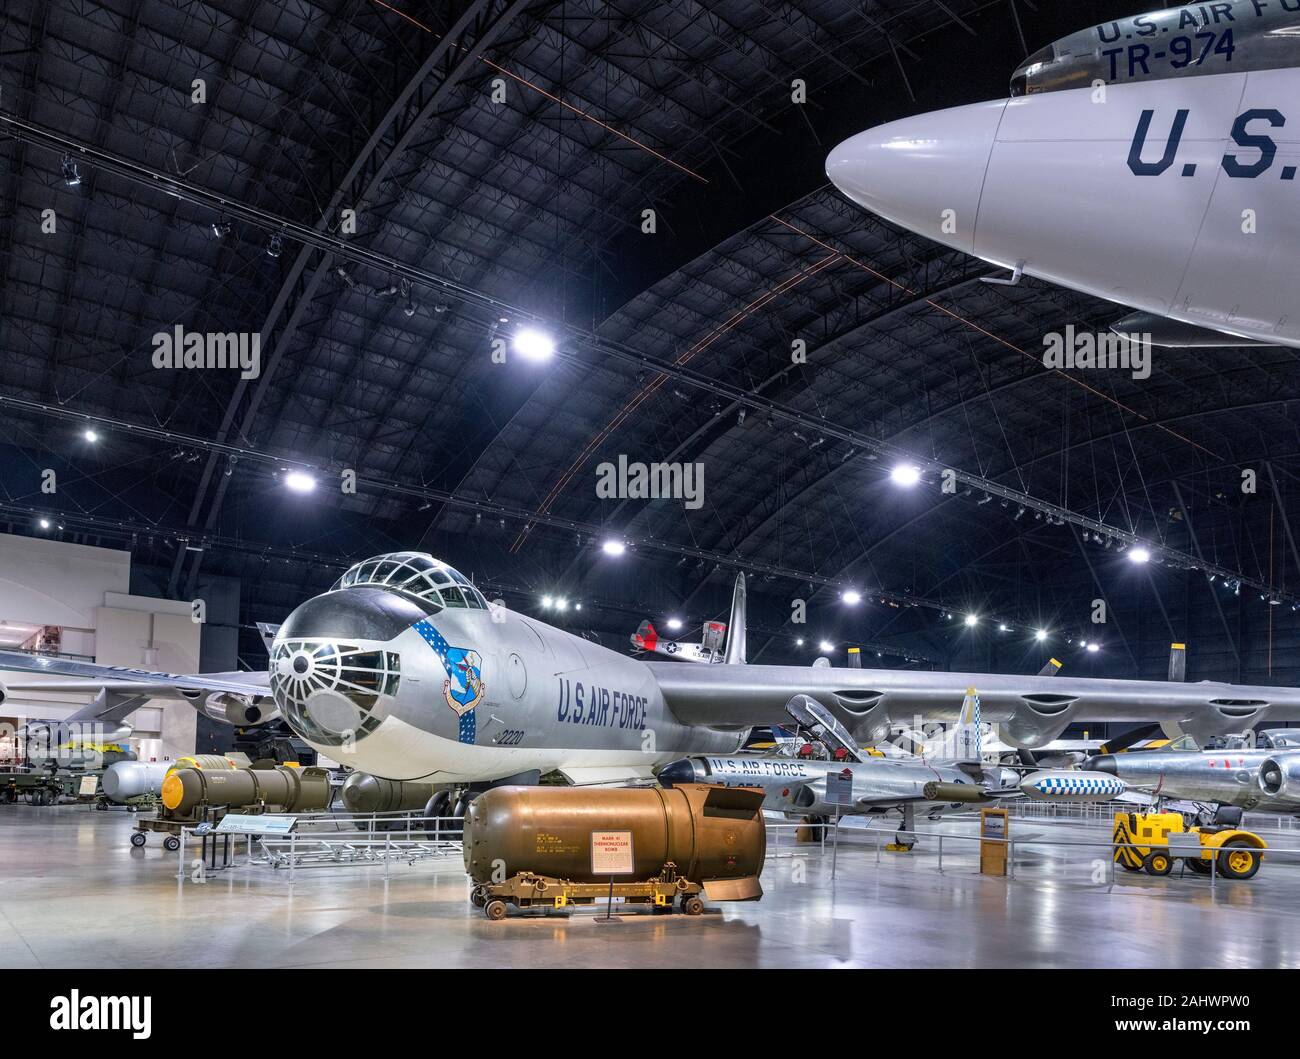 Convair B-36J Peacemaker strategic bomber, National Museum of the United States Air Force (formerly the United States Air Force Museum), Dayton, Ohio, USA. There is a Mark 41 (B41) Thermonuclear Bomb in the foreground. Stock Photo